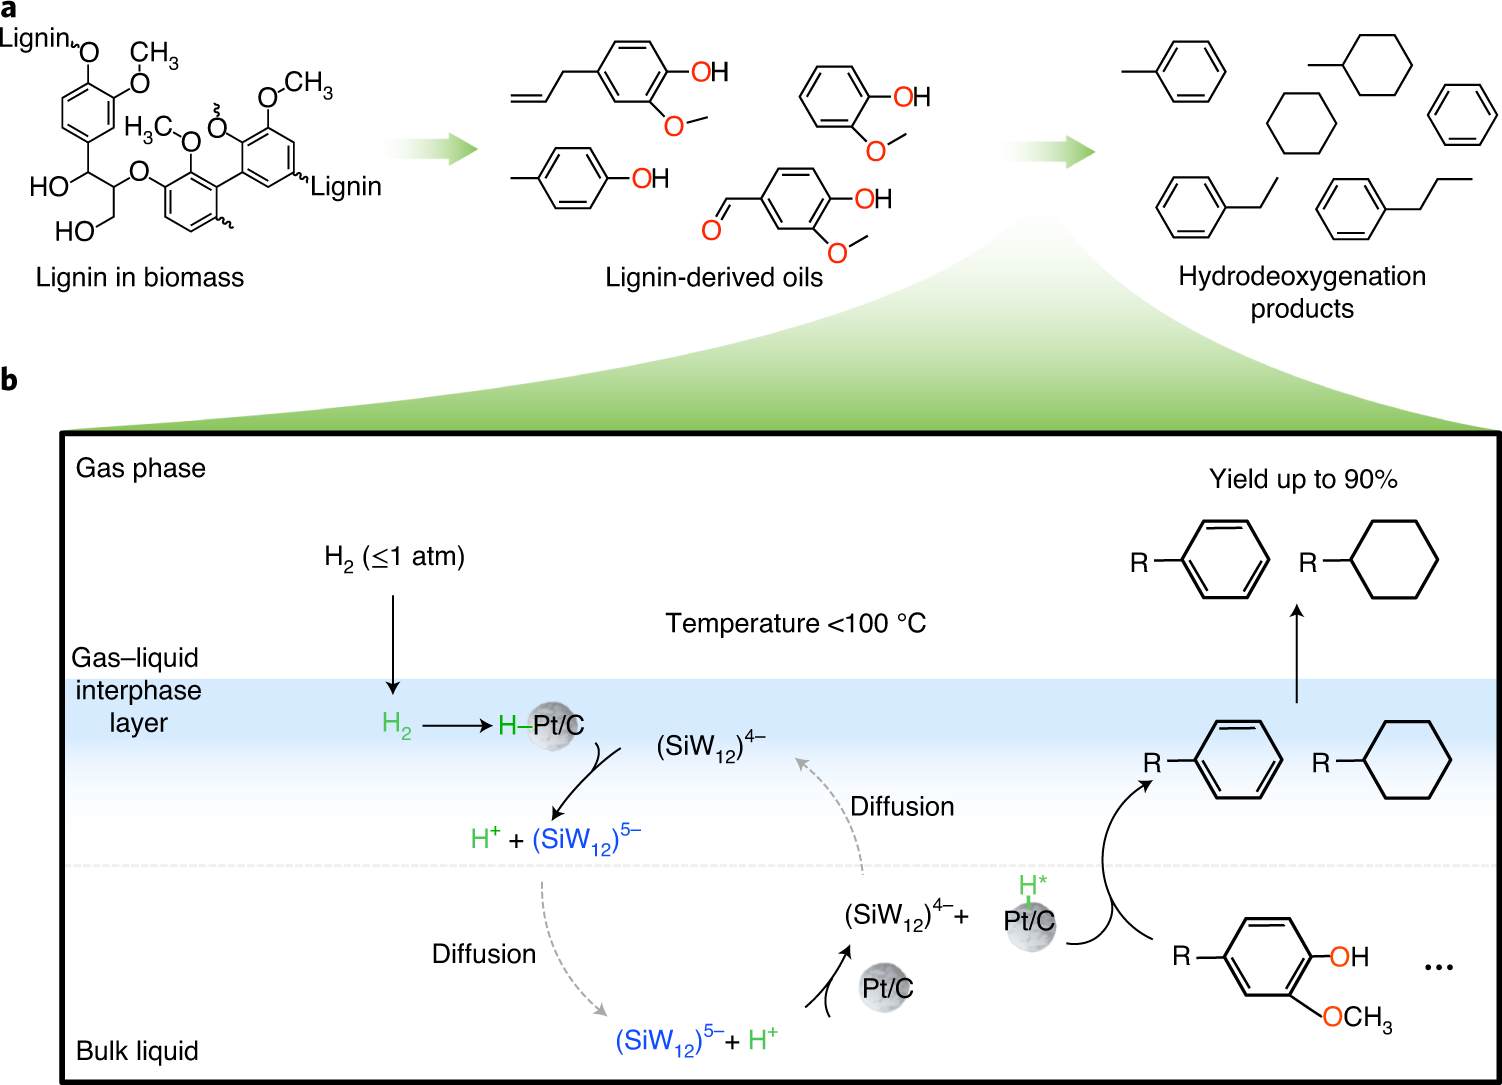 Ambient-pressure and low-temperature upgrading of lignin bio-oil to  hydrocarbons using a hydrogen buffer catalytic system | Nature Energy